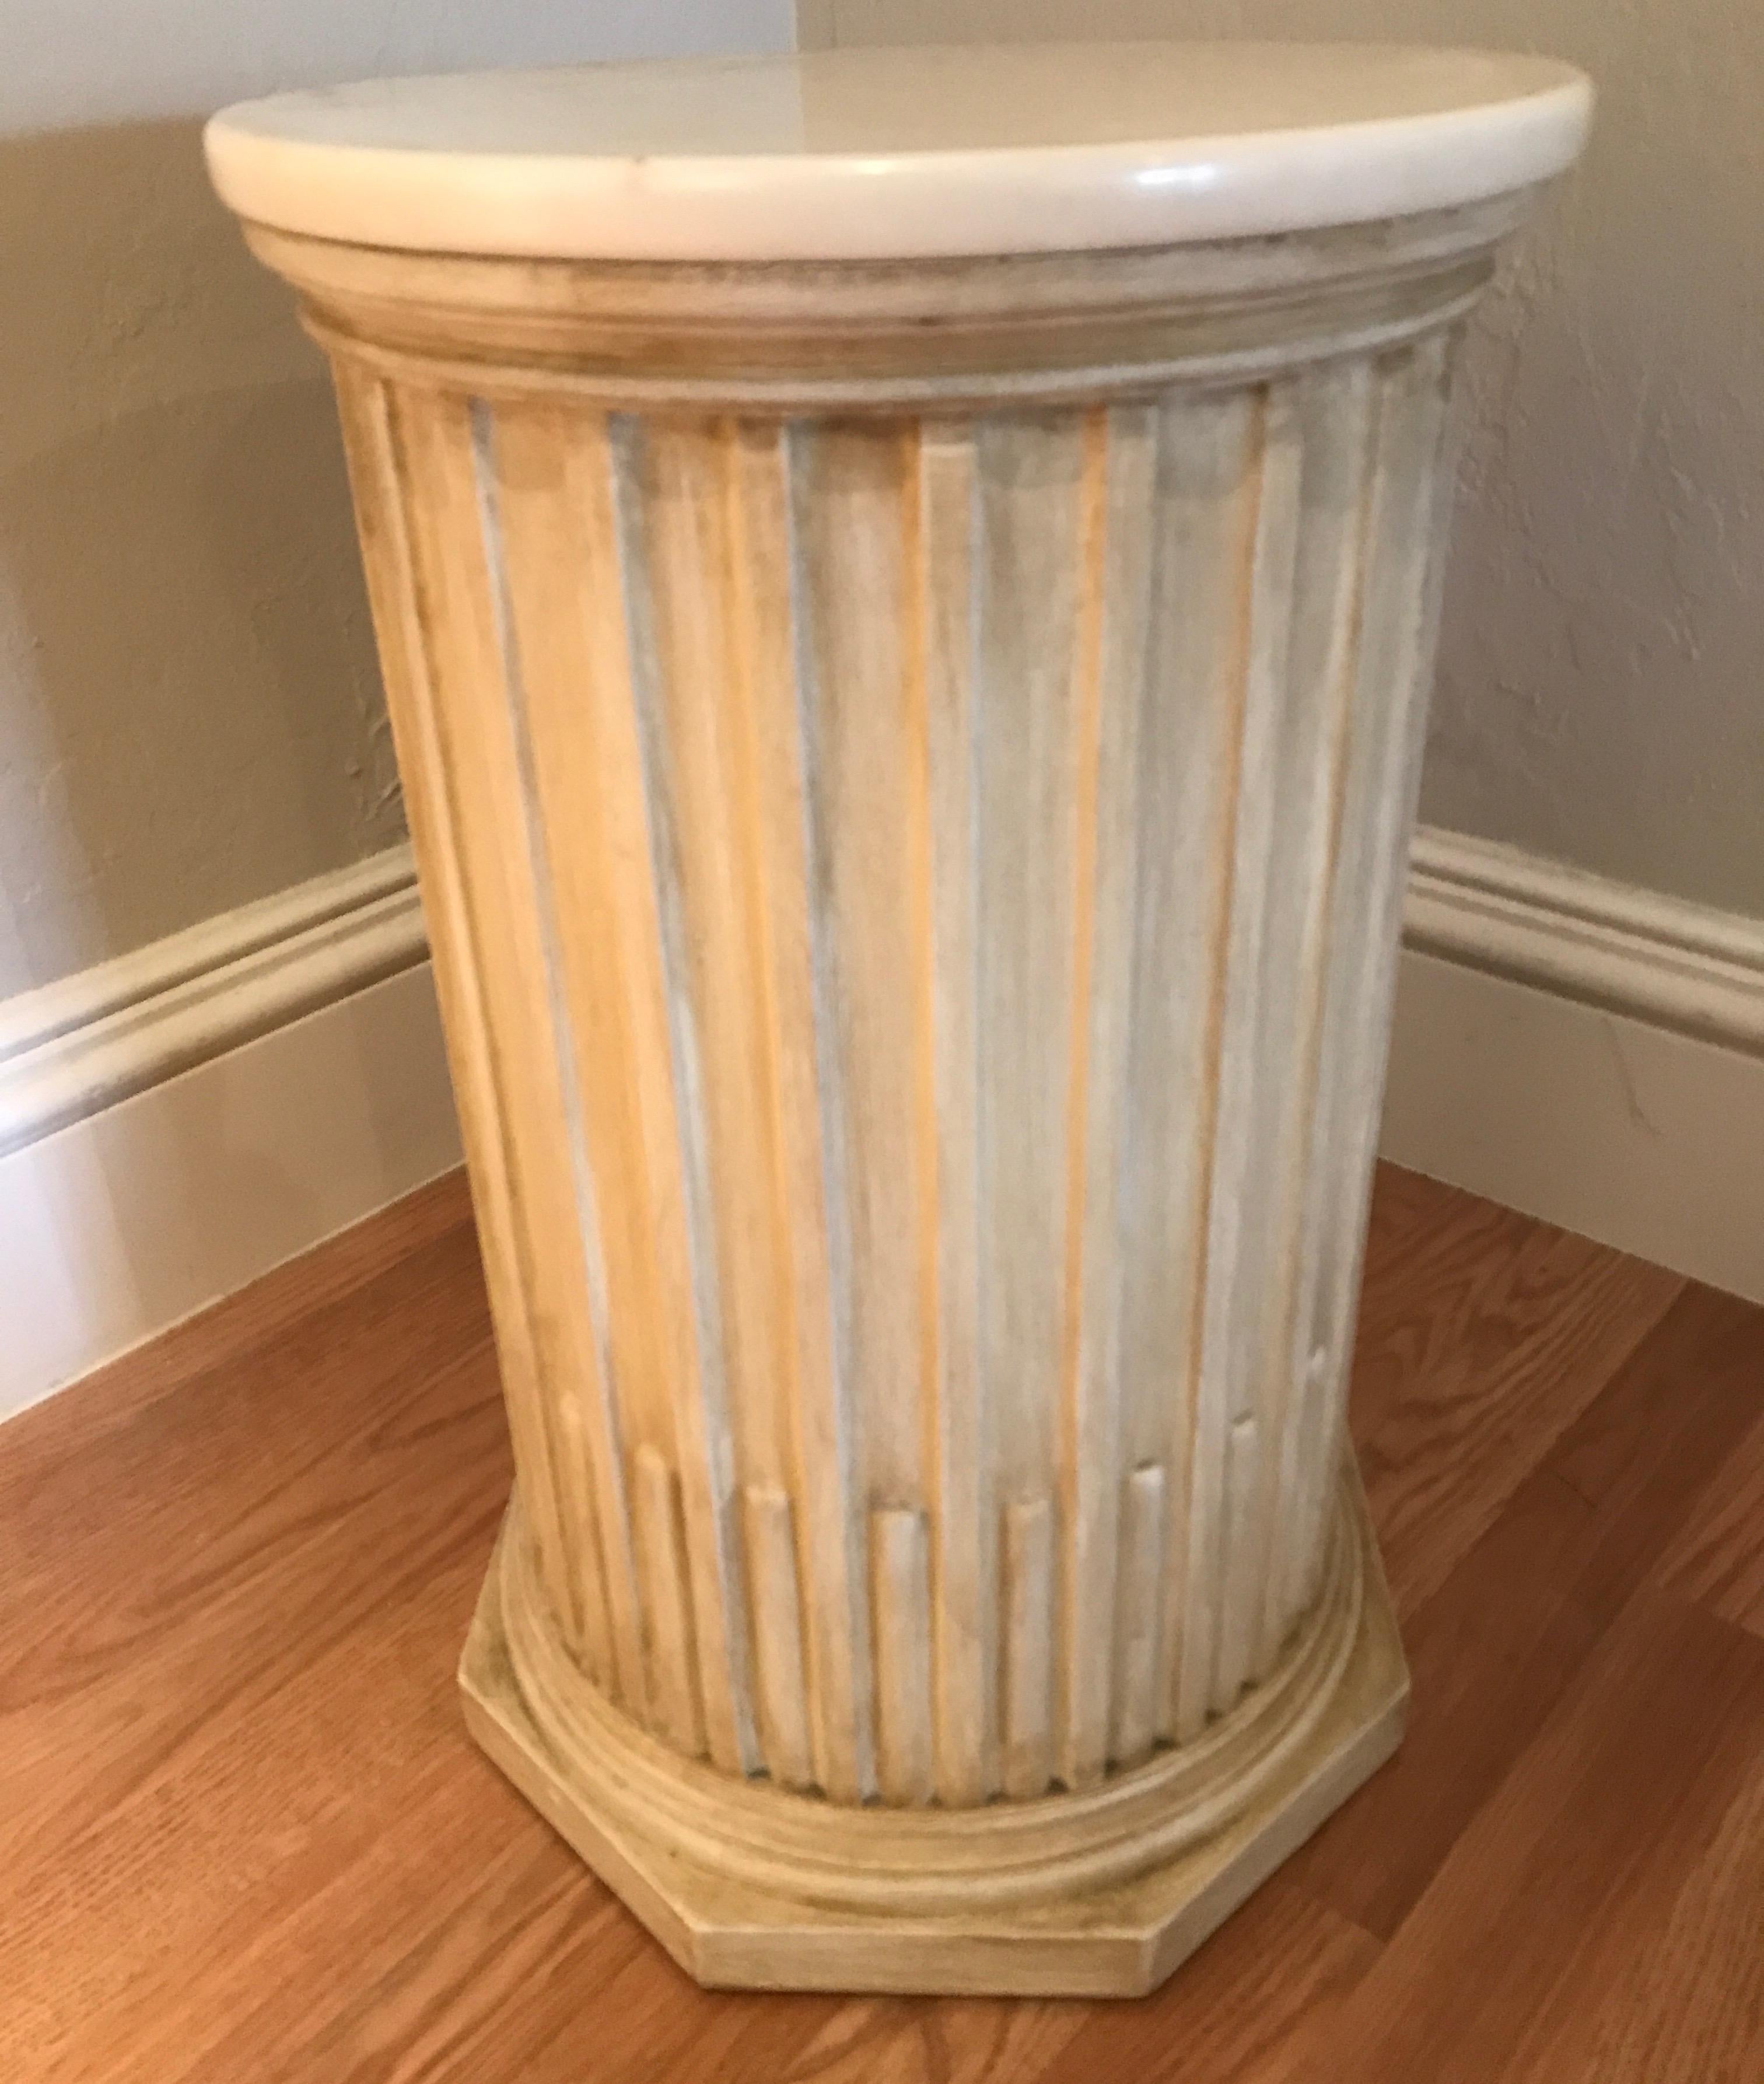 Antiqued white fluted wood pedestal with marble top.